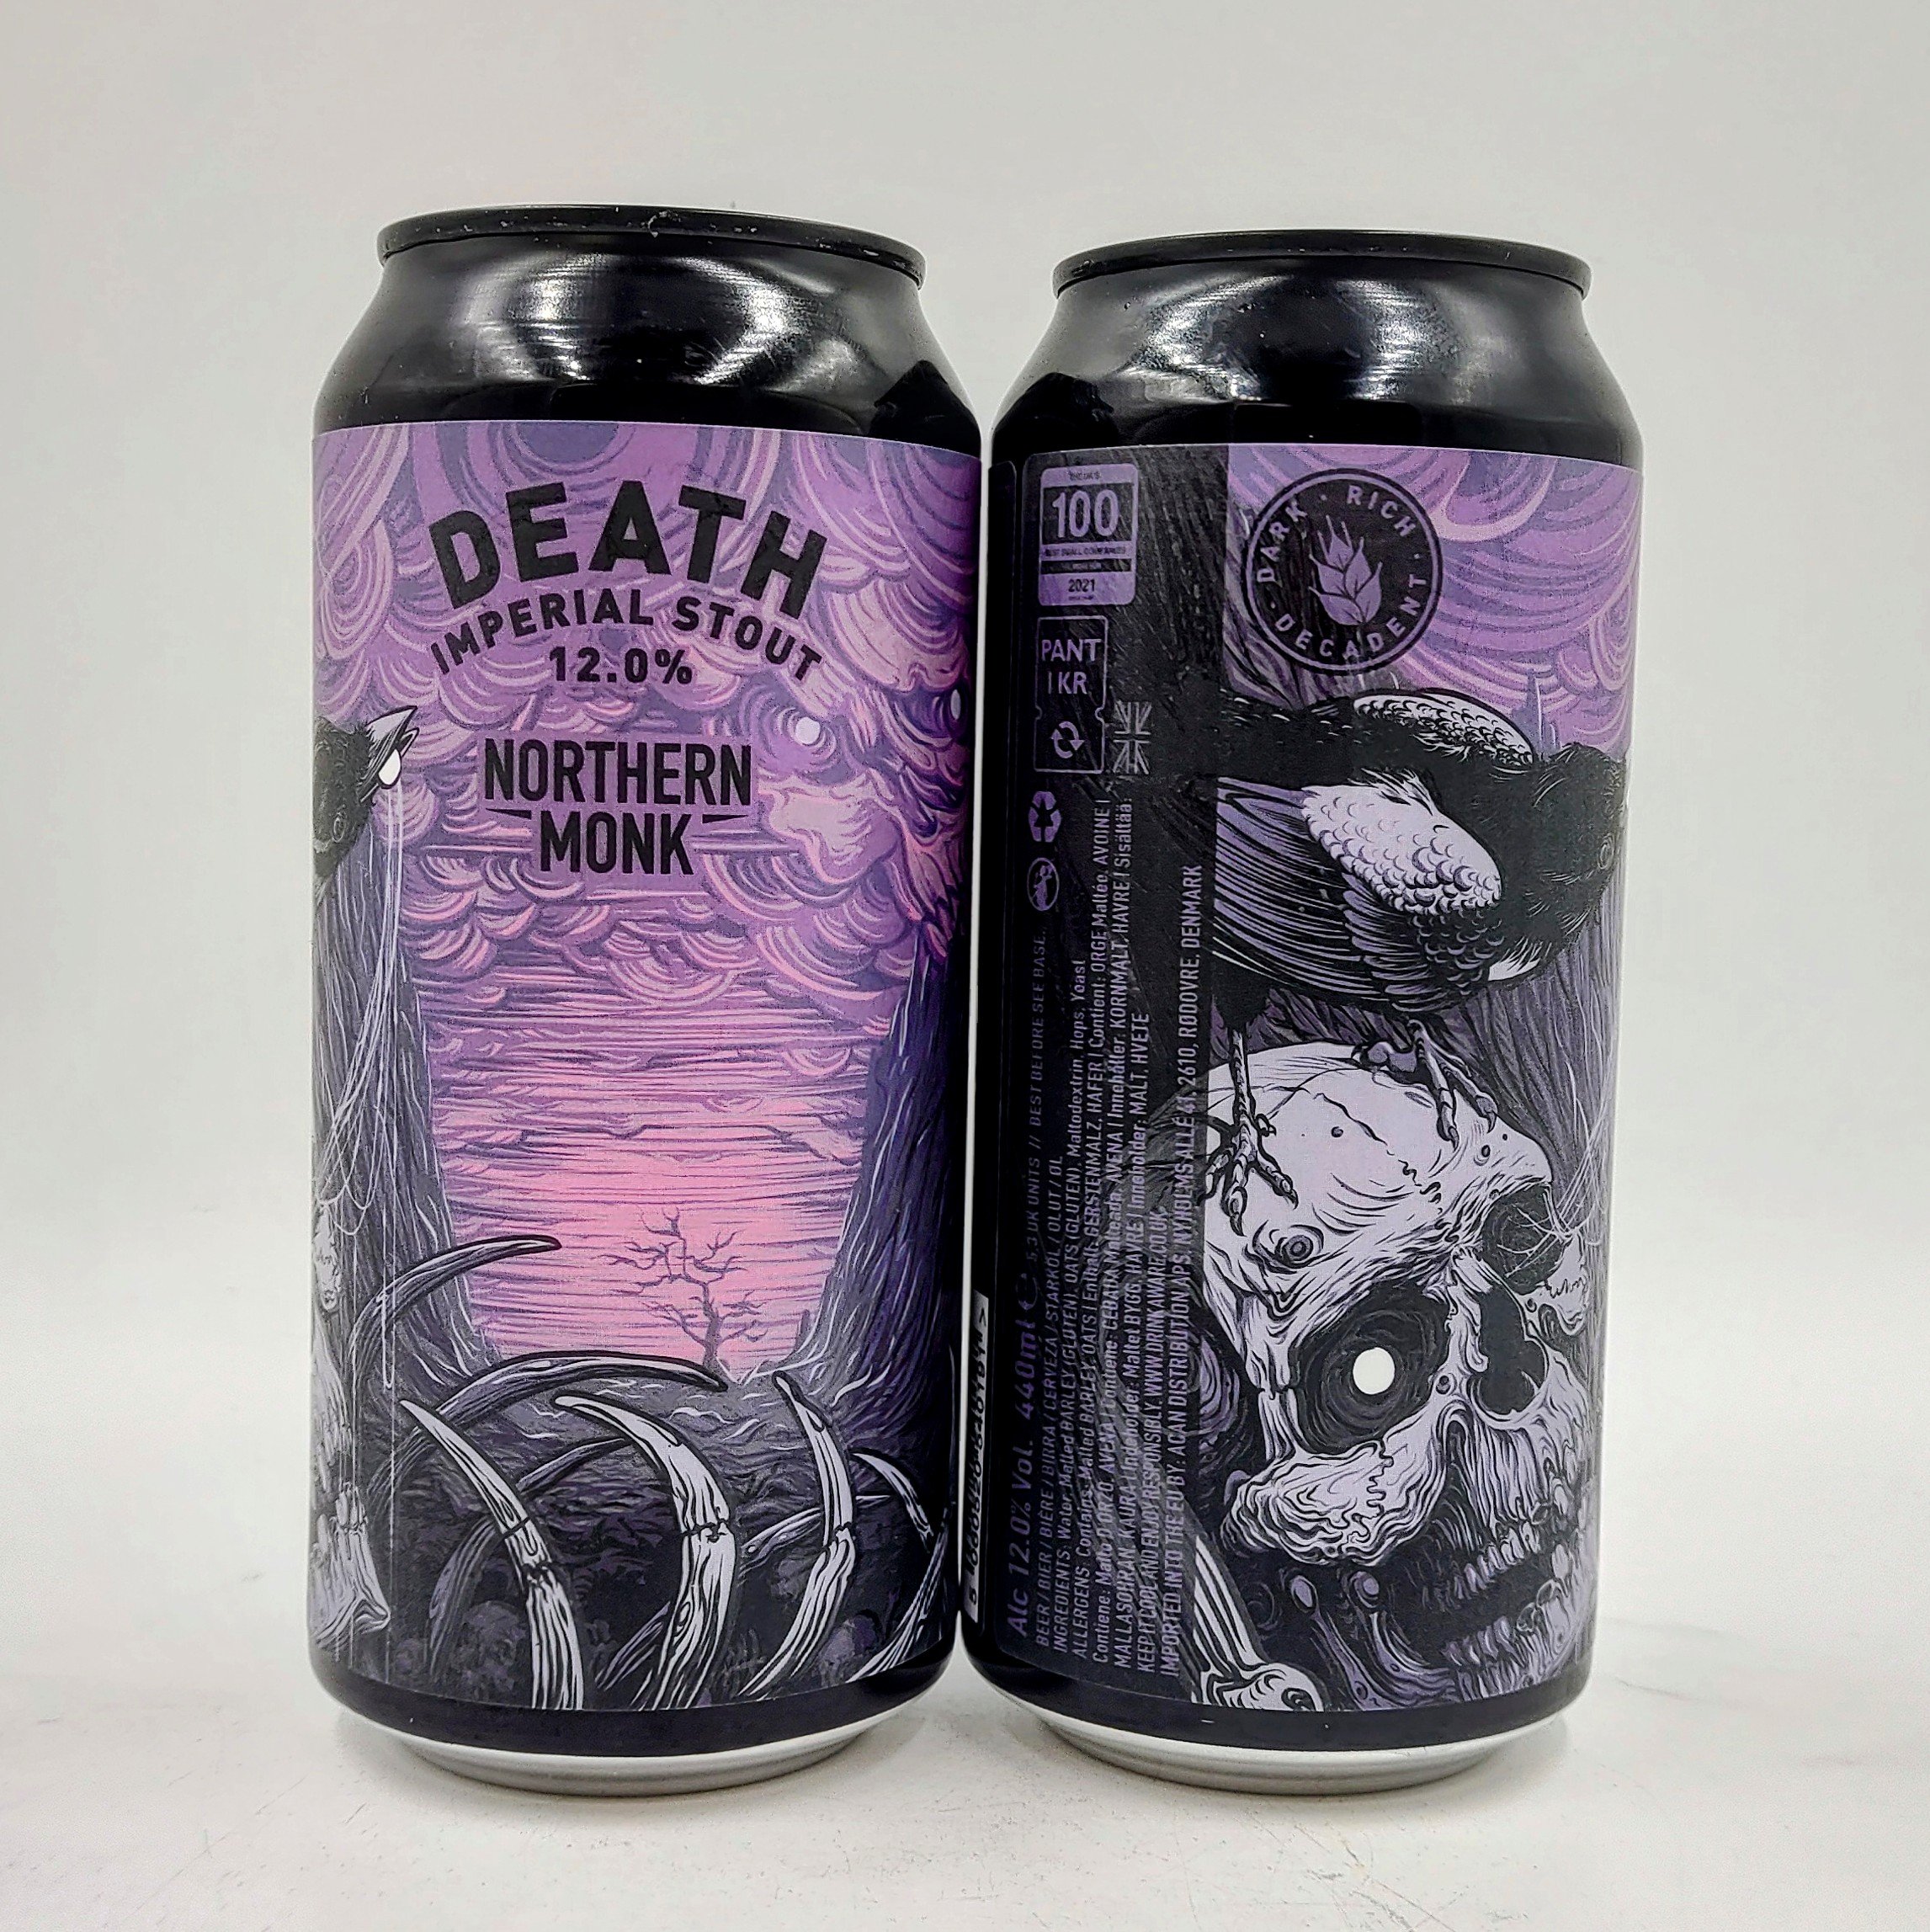 Northern Monk DEATH  Imperial Stout 2022 - Untappd  4,18  - Fish & Beer